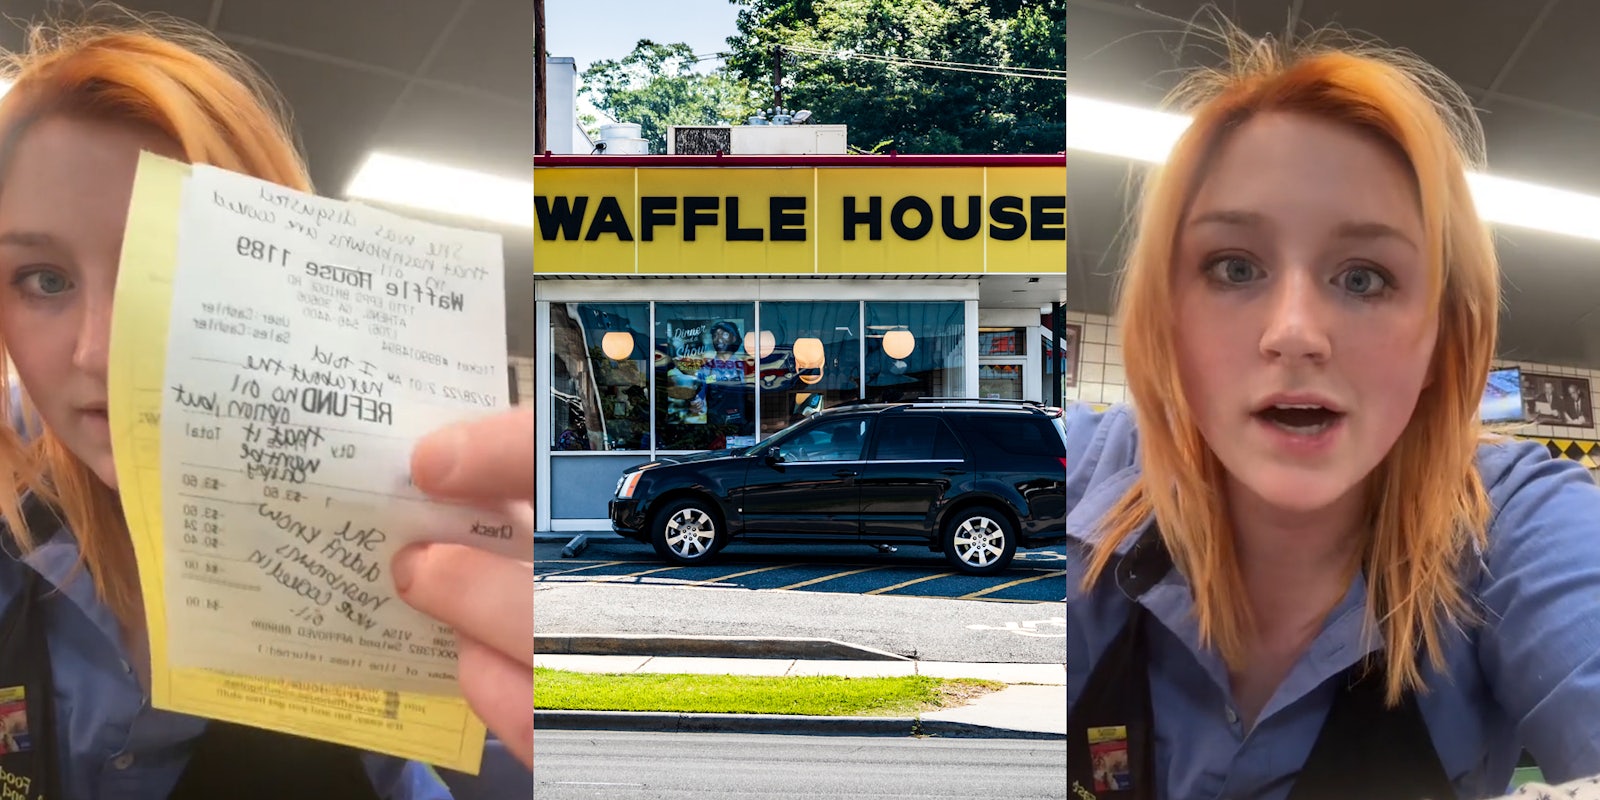 Waffle house employee holding receipt that says 'REFUND' (l) Waffle House building with sign (c) Waffle House employee speaking (r)